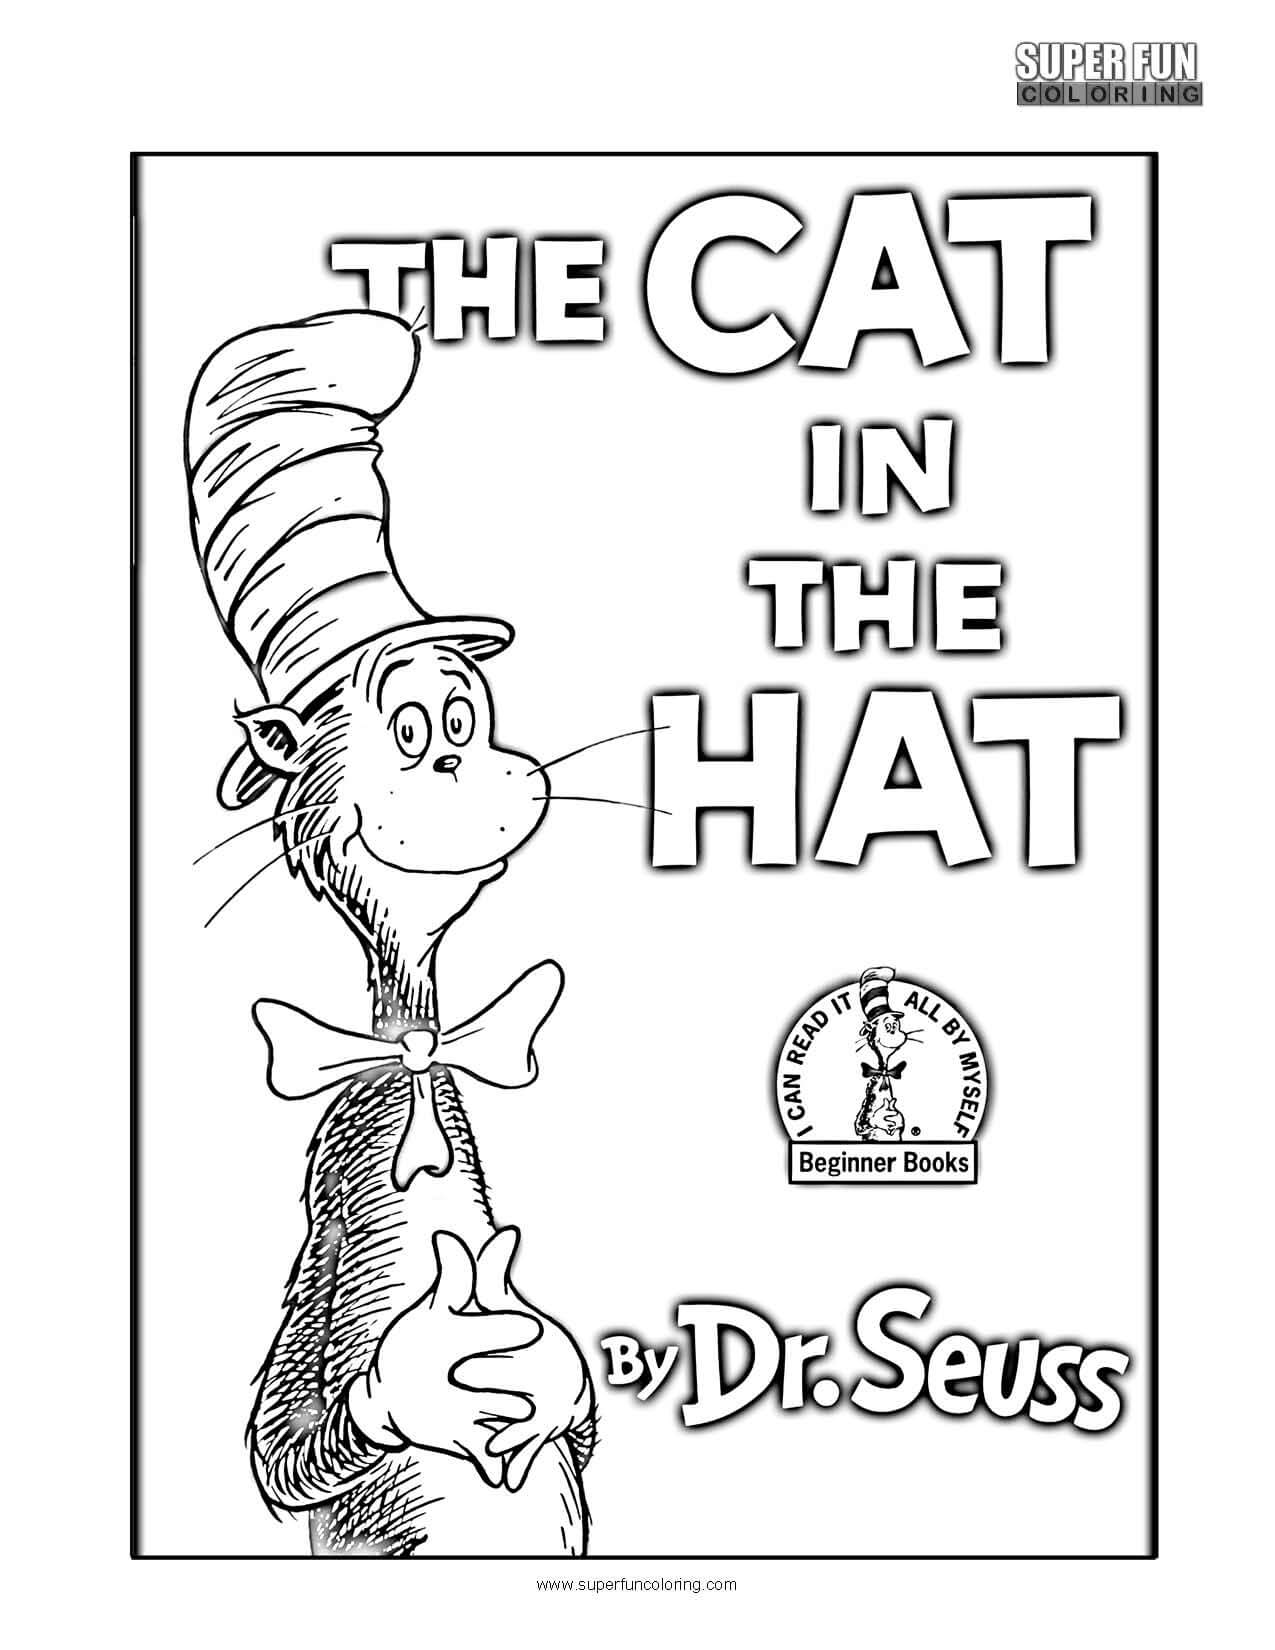 Cat in the Hat Coloring Page   Super Fun Coloring